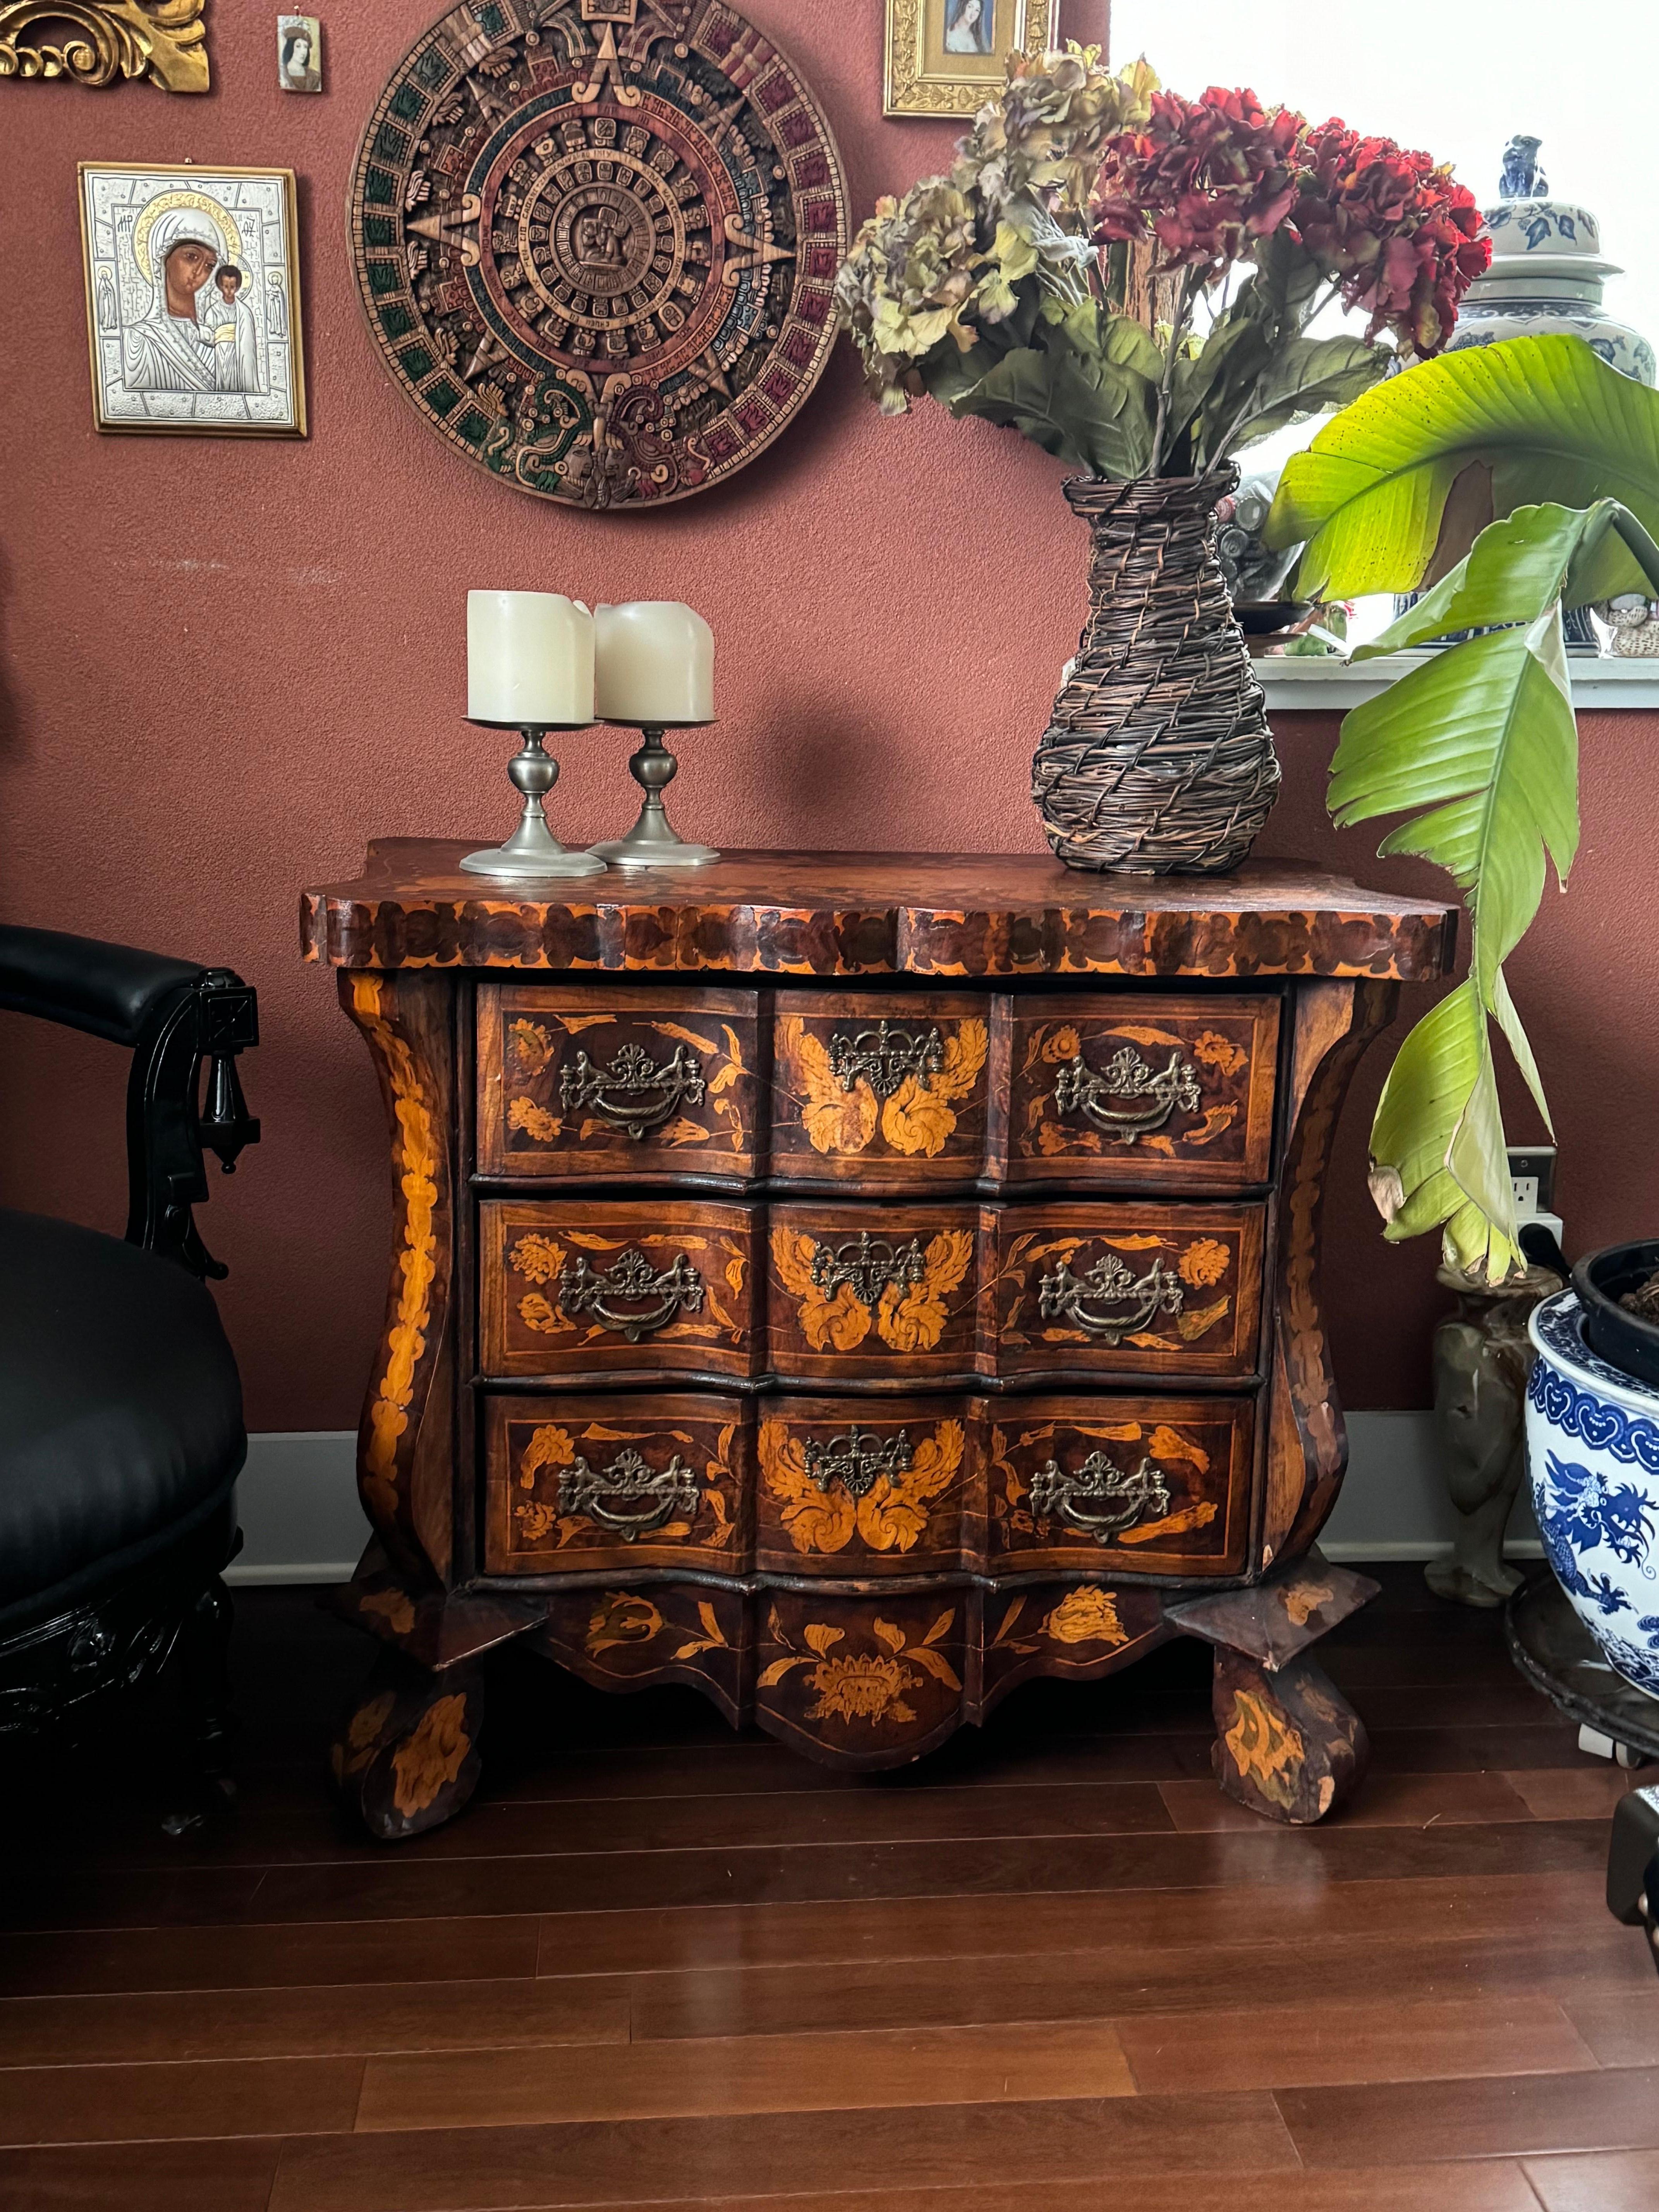 This is a Dutch Rococo style commode, featuring intricate satinwood marquetry on a burl mahogany background. The commode has a serpentine front, ornate with floral and foliage inlays, and is fitted with metal handles on the drawers. The curvature